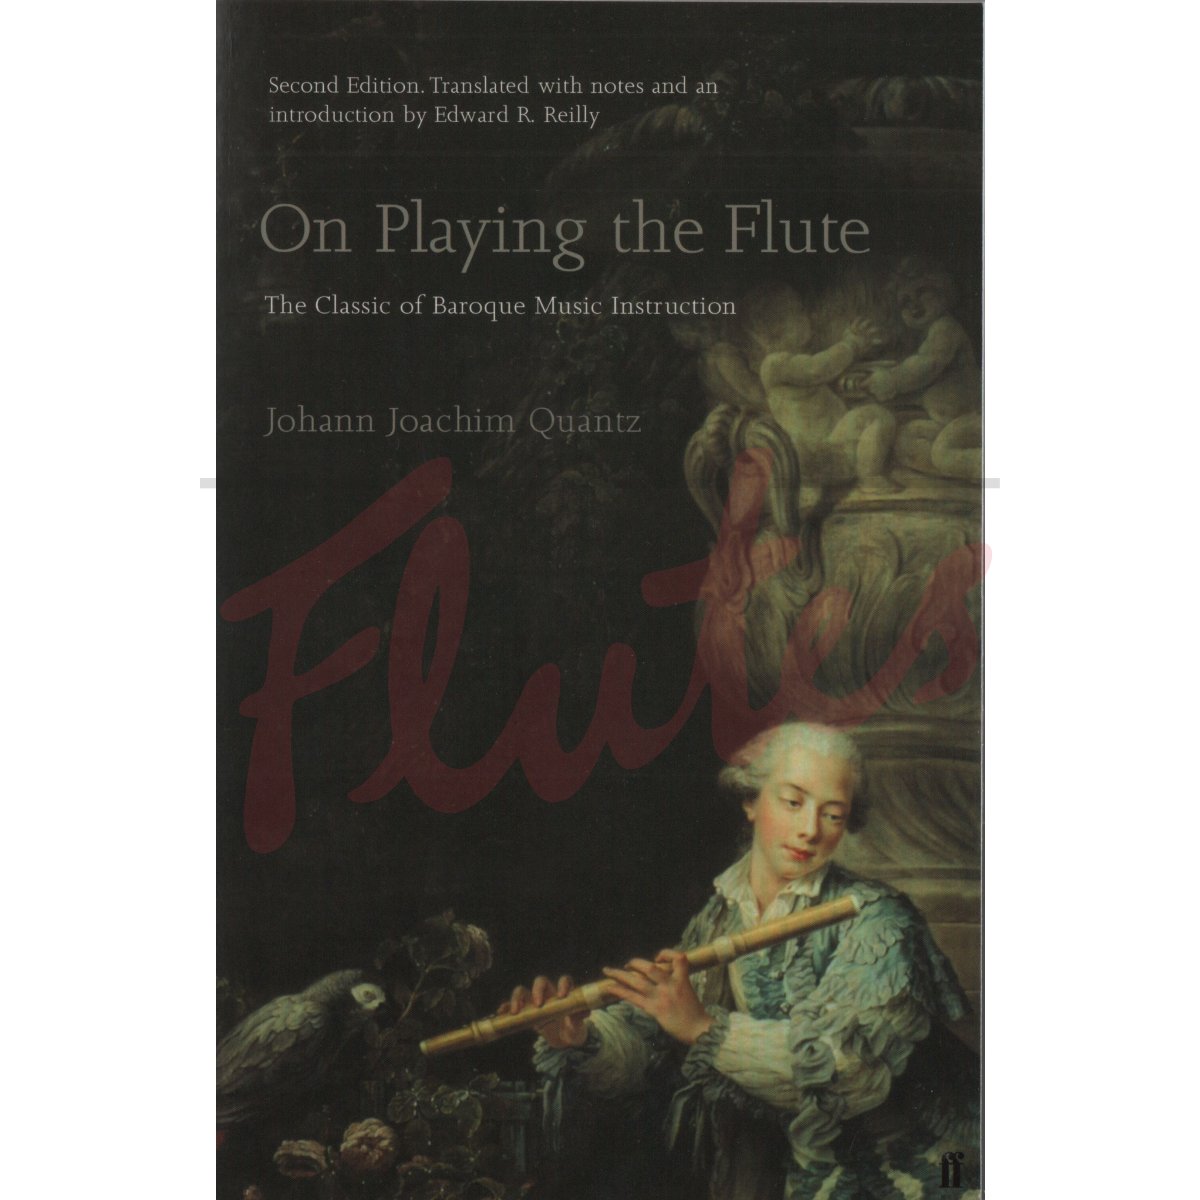 On Playing the Flute (Second Edition)